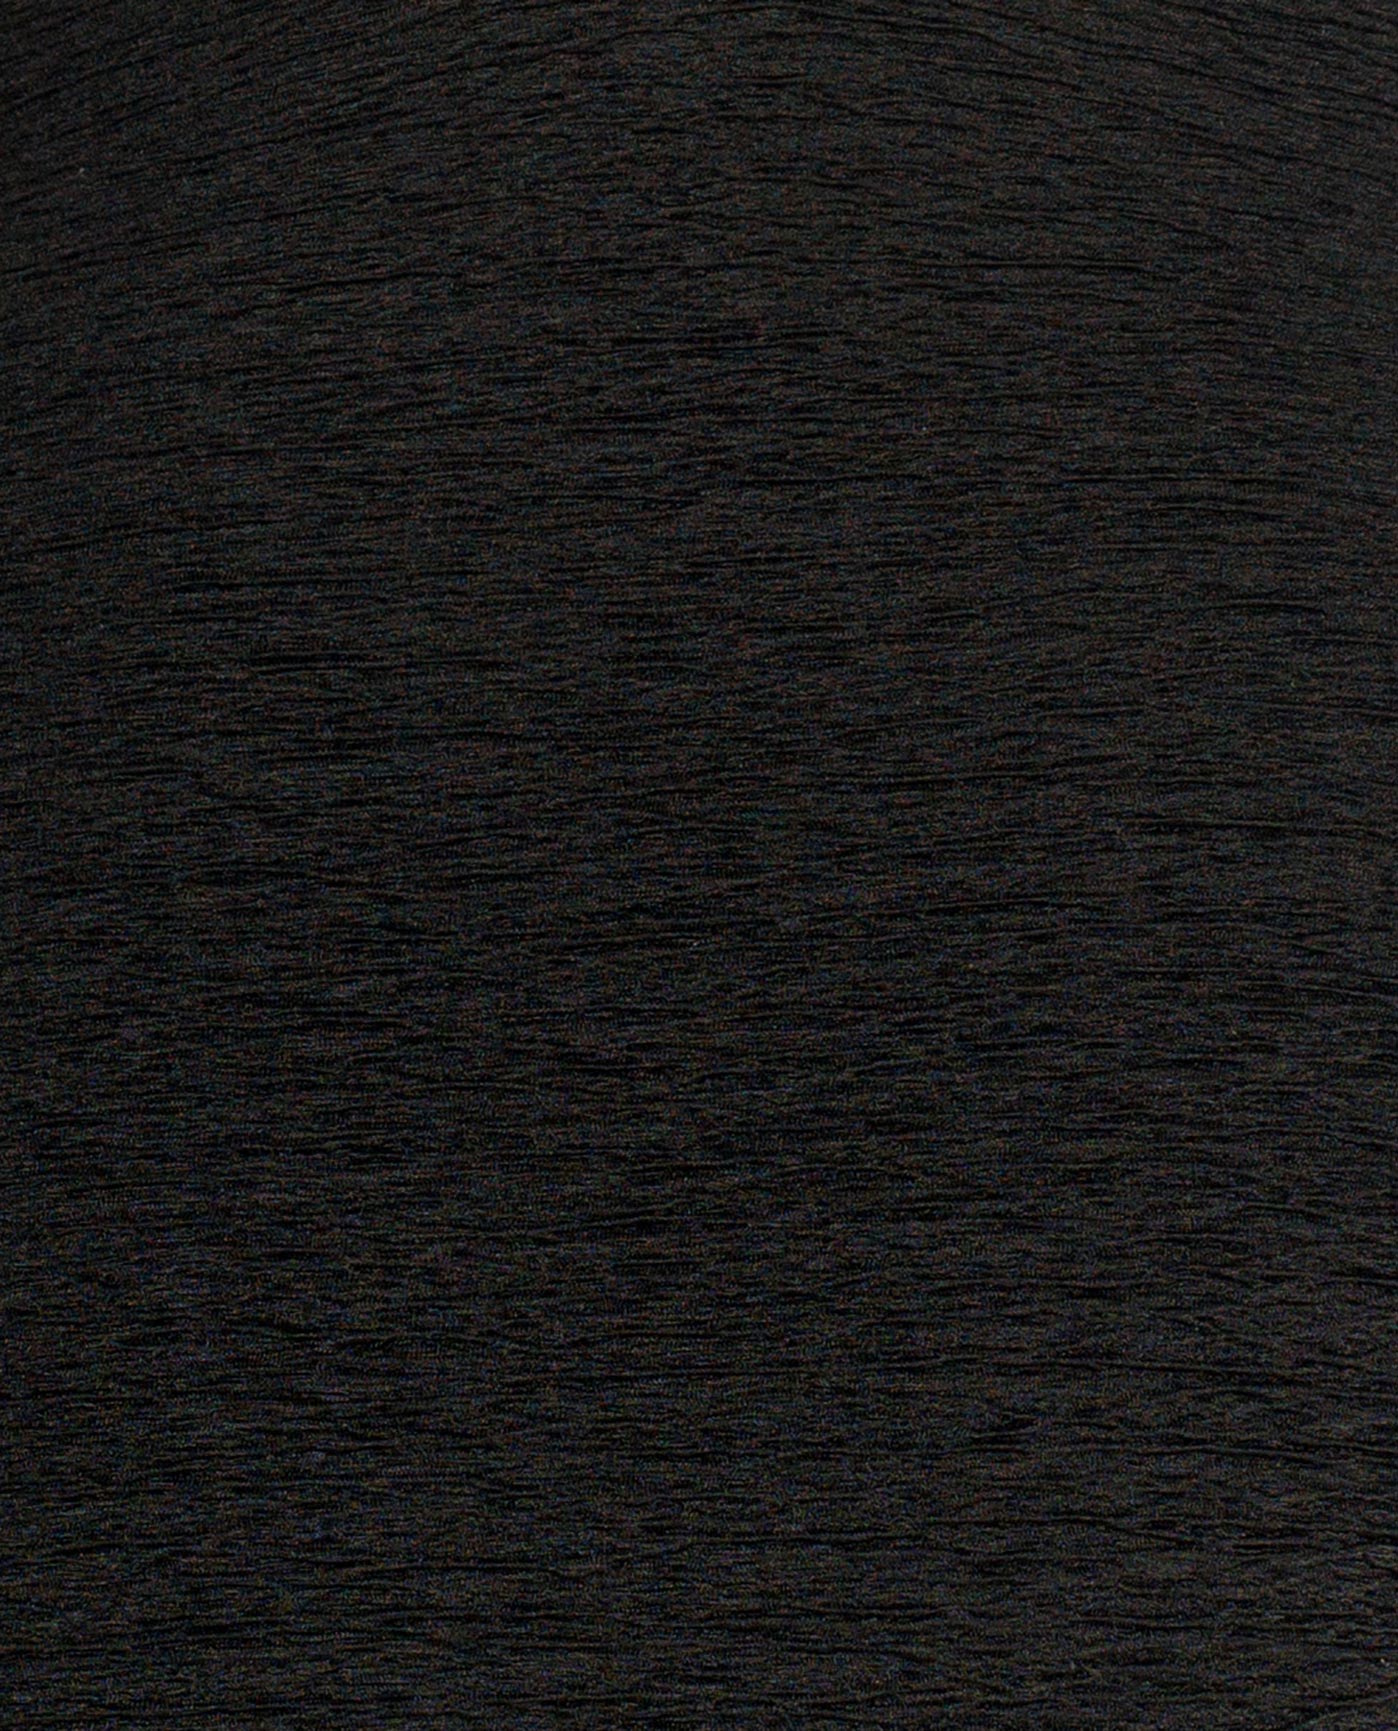 FABRIC SWATCH VIEW OF CHLORINE RESISTANT KRINKLE TEXTURED SOLID SQUARE NECK PLUS SIZE ONE PIECE | KRINKLE BLACK 2023